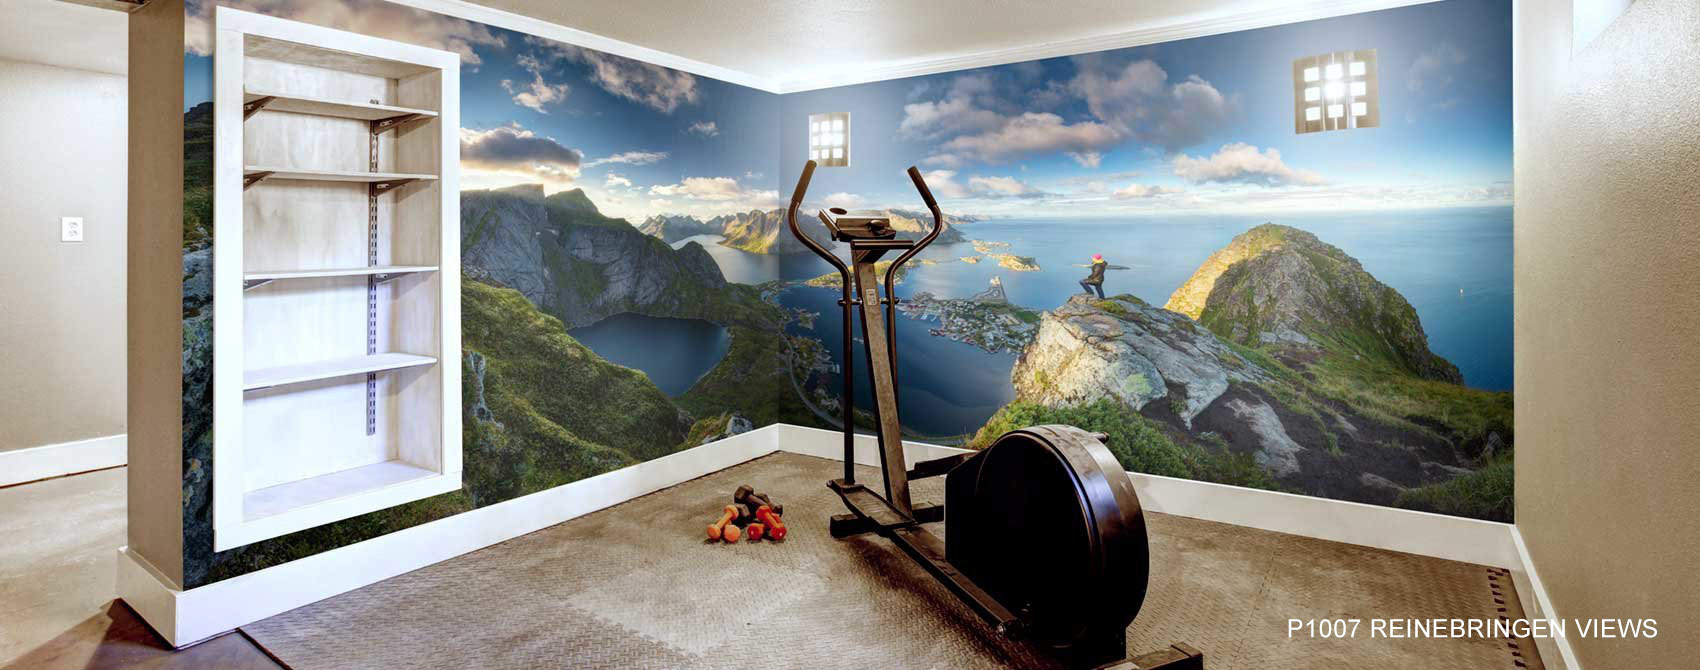 Home Gym Wallpaper | Home Gym Murals - Murals Your Way